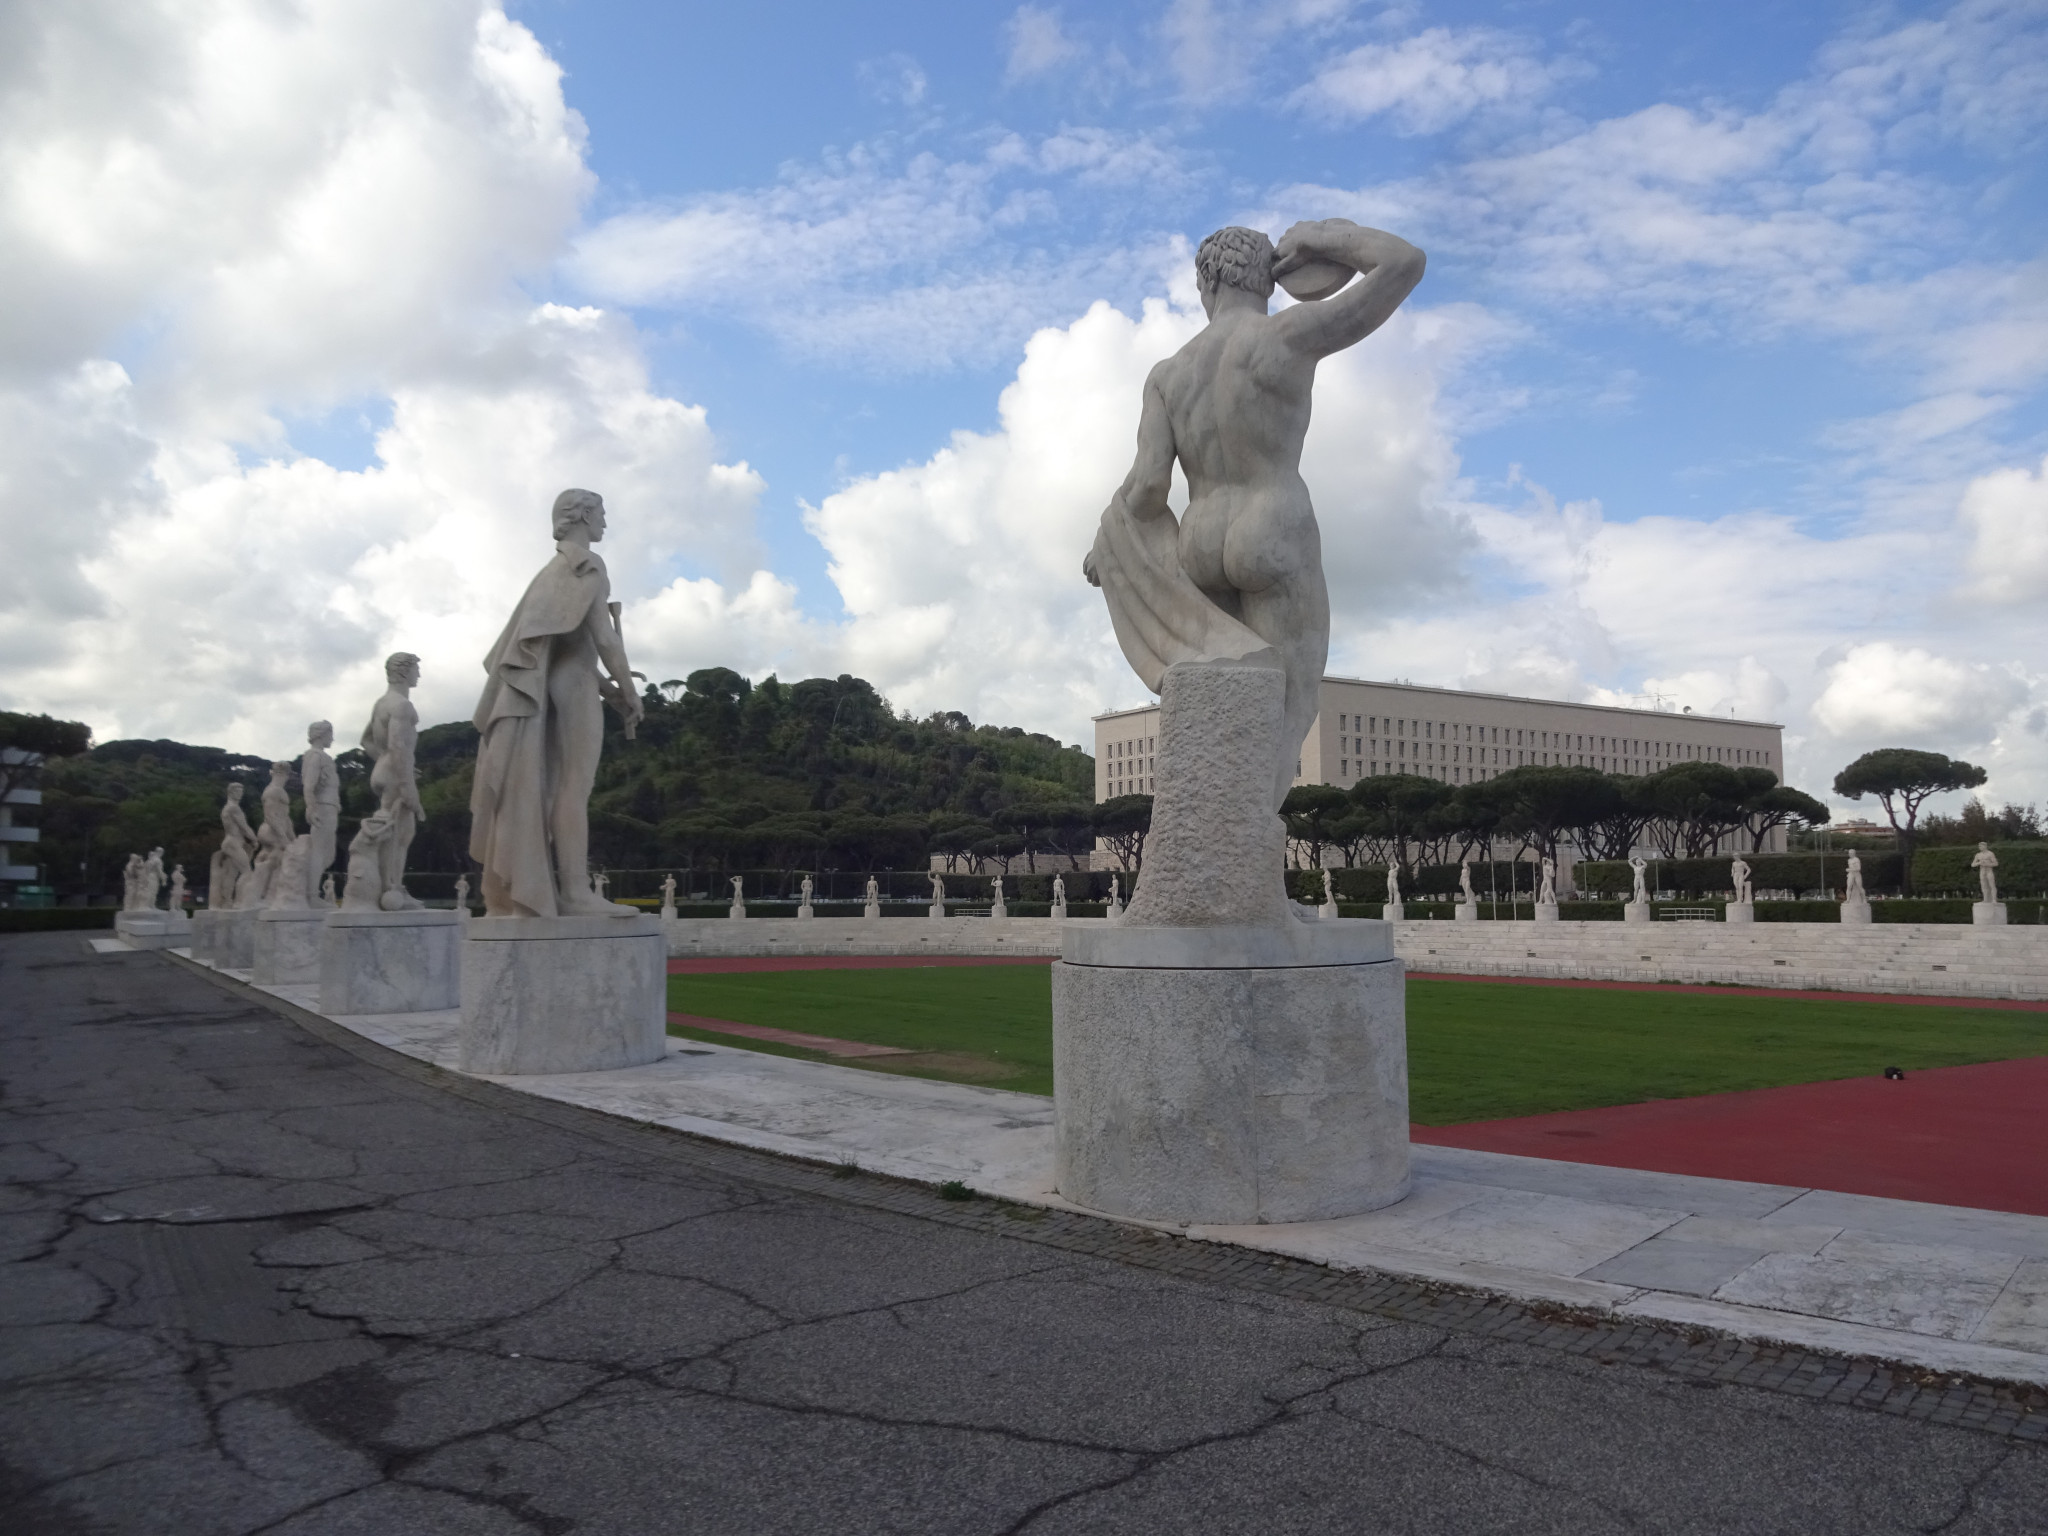 Statues look out over the athletics track at the Stadio dei Marmi ©Philip Barker